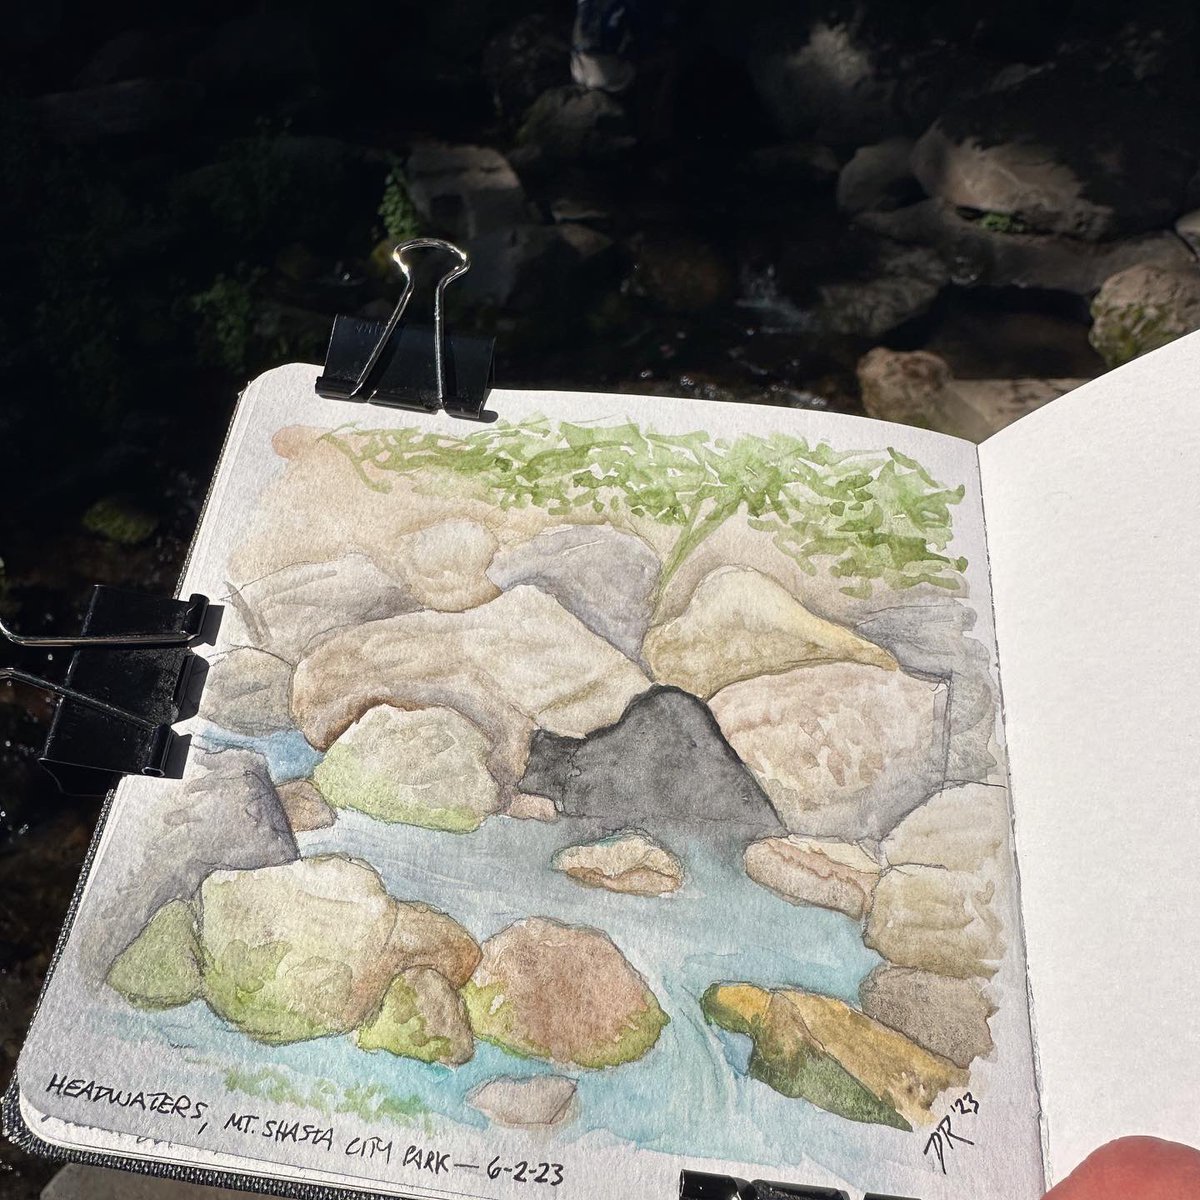 Today’s plein air done at Mt. Shasta City Park, home of the headwaters of the Sacramento River! Painted with GENUINE HEADWATERS 😂

#watercolor #watercolour #watercolorart #mountshasta #mtshasta #visitmtshasta #siskiyoucounty #gooutside #nature #naturelovers #creative #painting